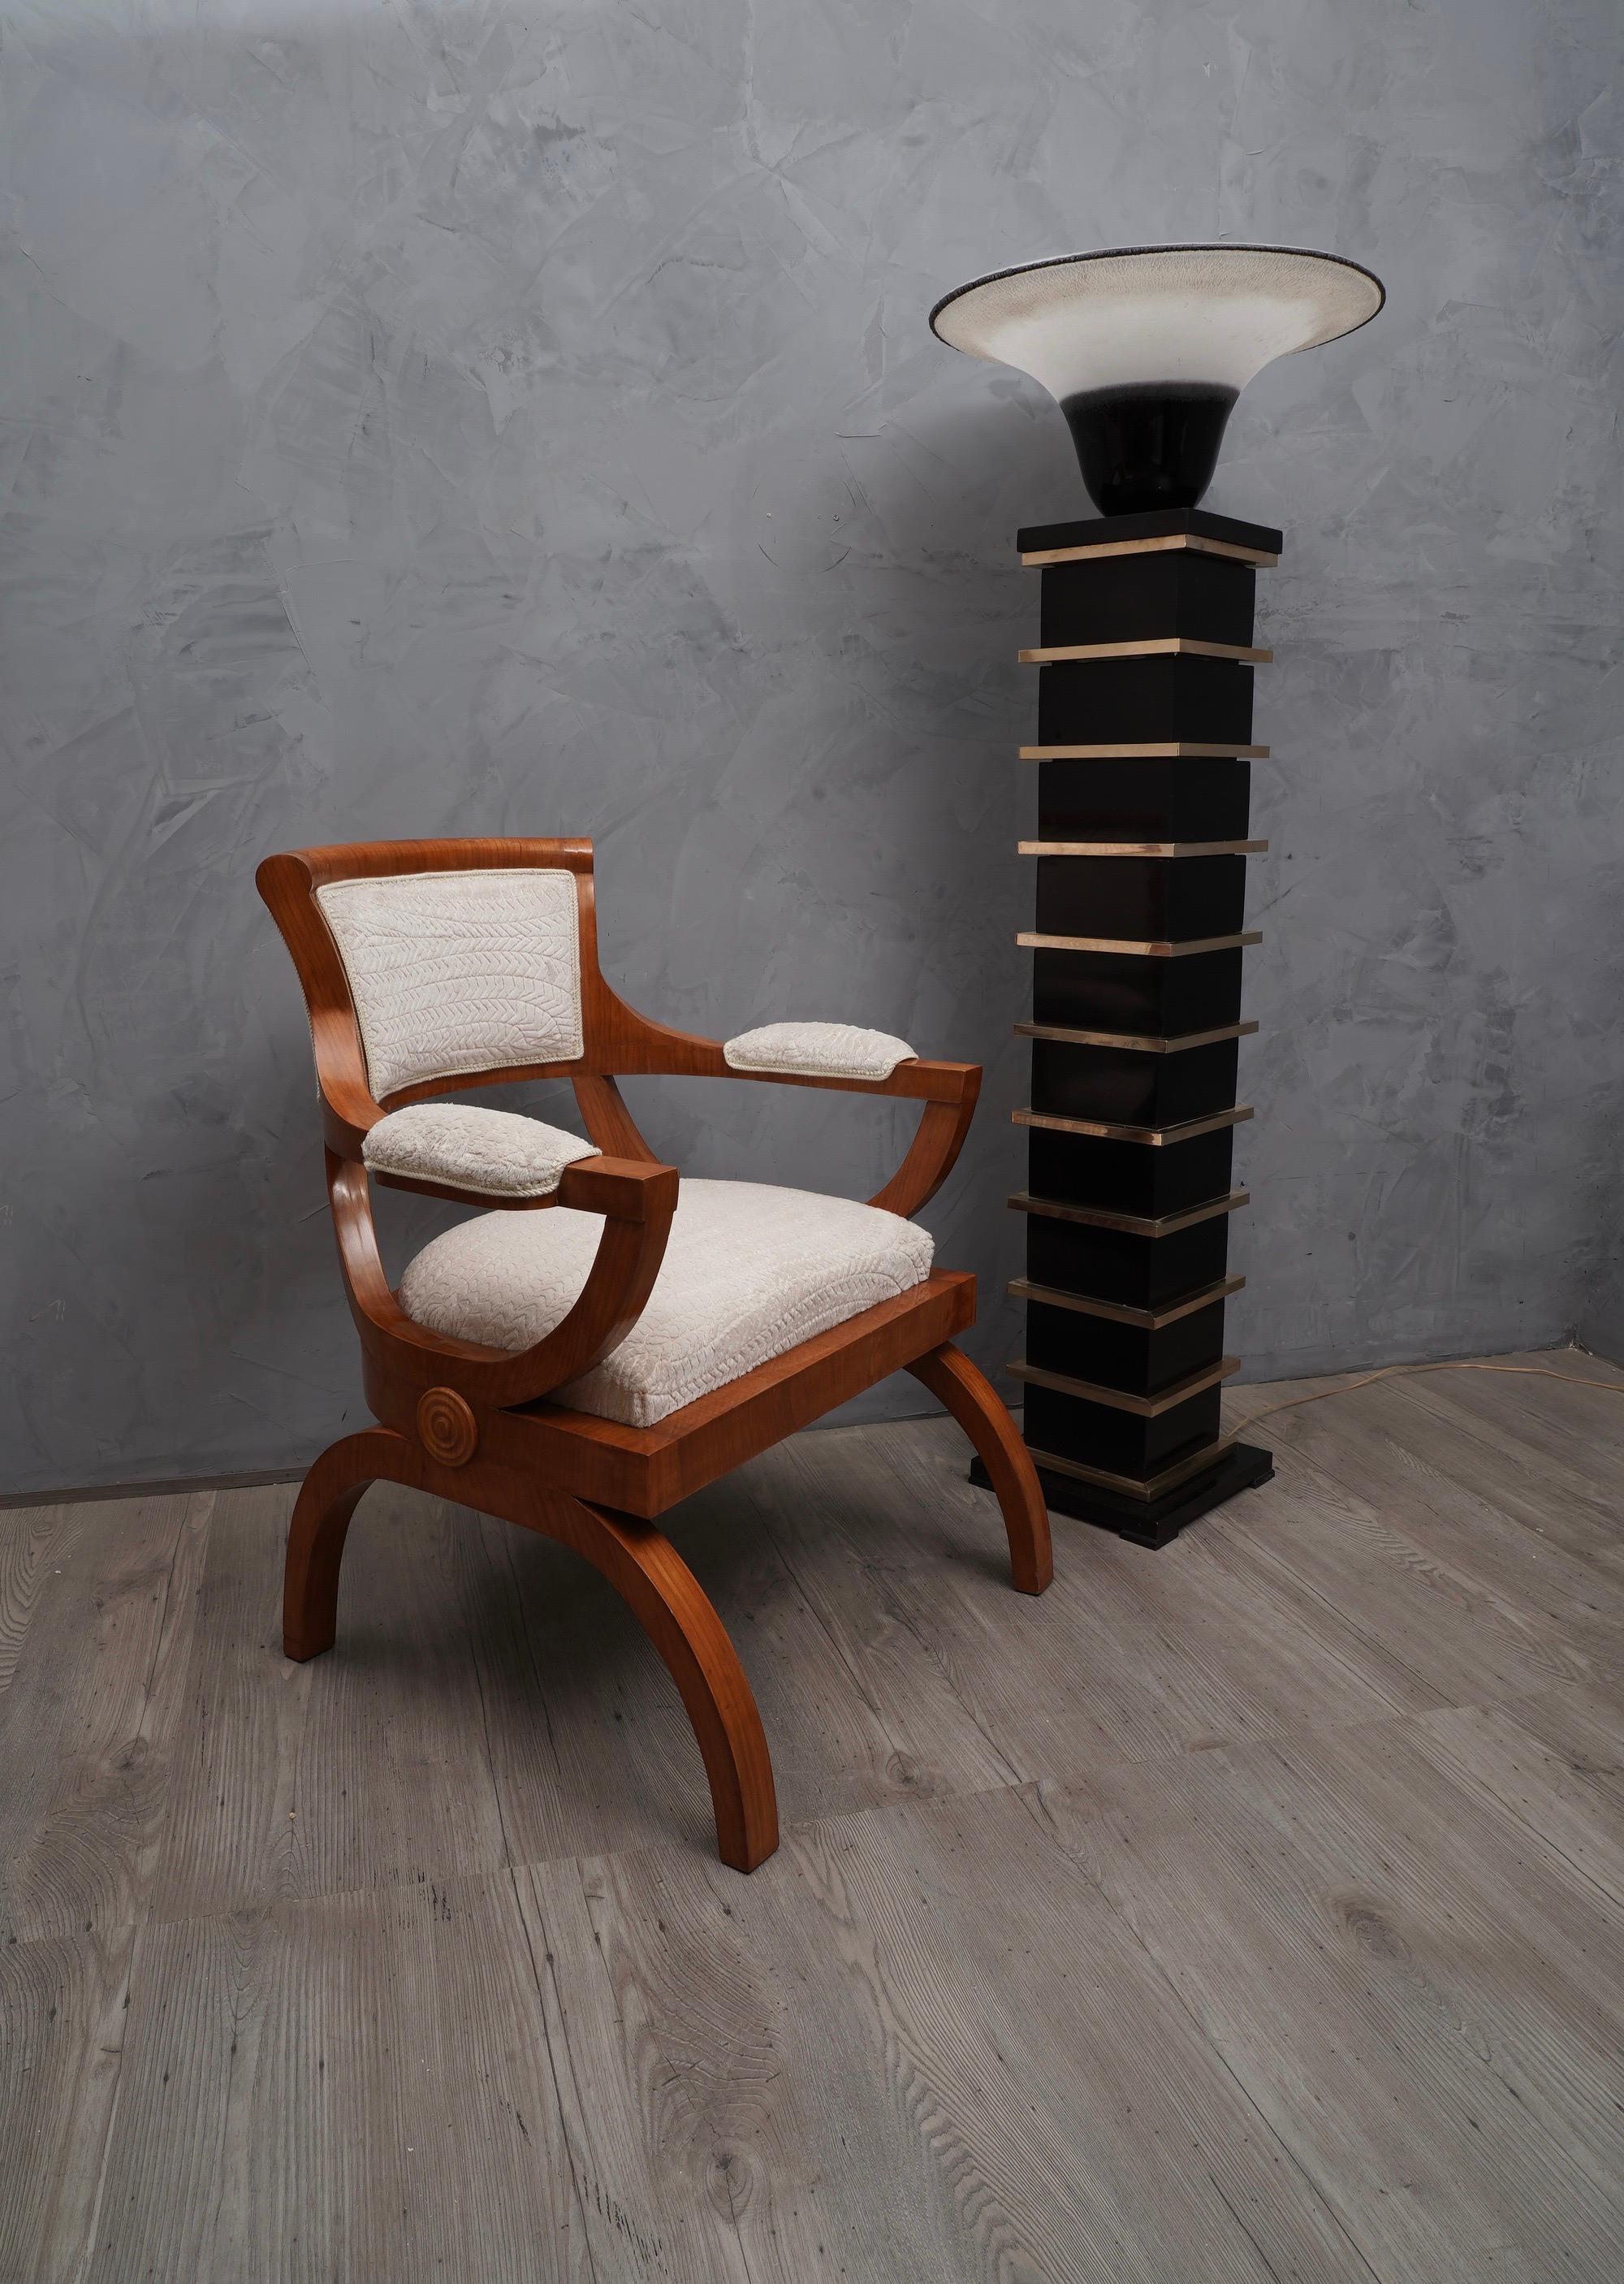 Armchair with a particular design and precious cherrywood, all finished with a beautiful white stitched velvet fabric.

All veneered in cherrywood and covered with a white embroidered velvet fabric. The design of the chair is very particular and